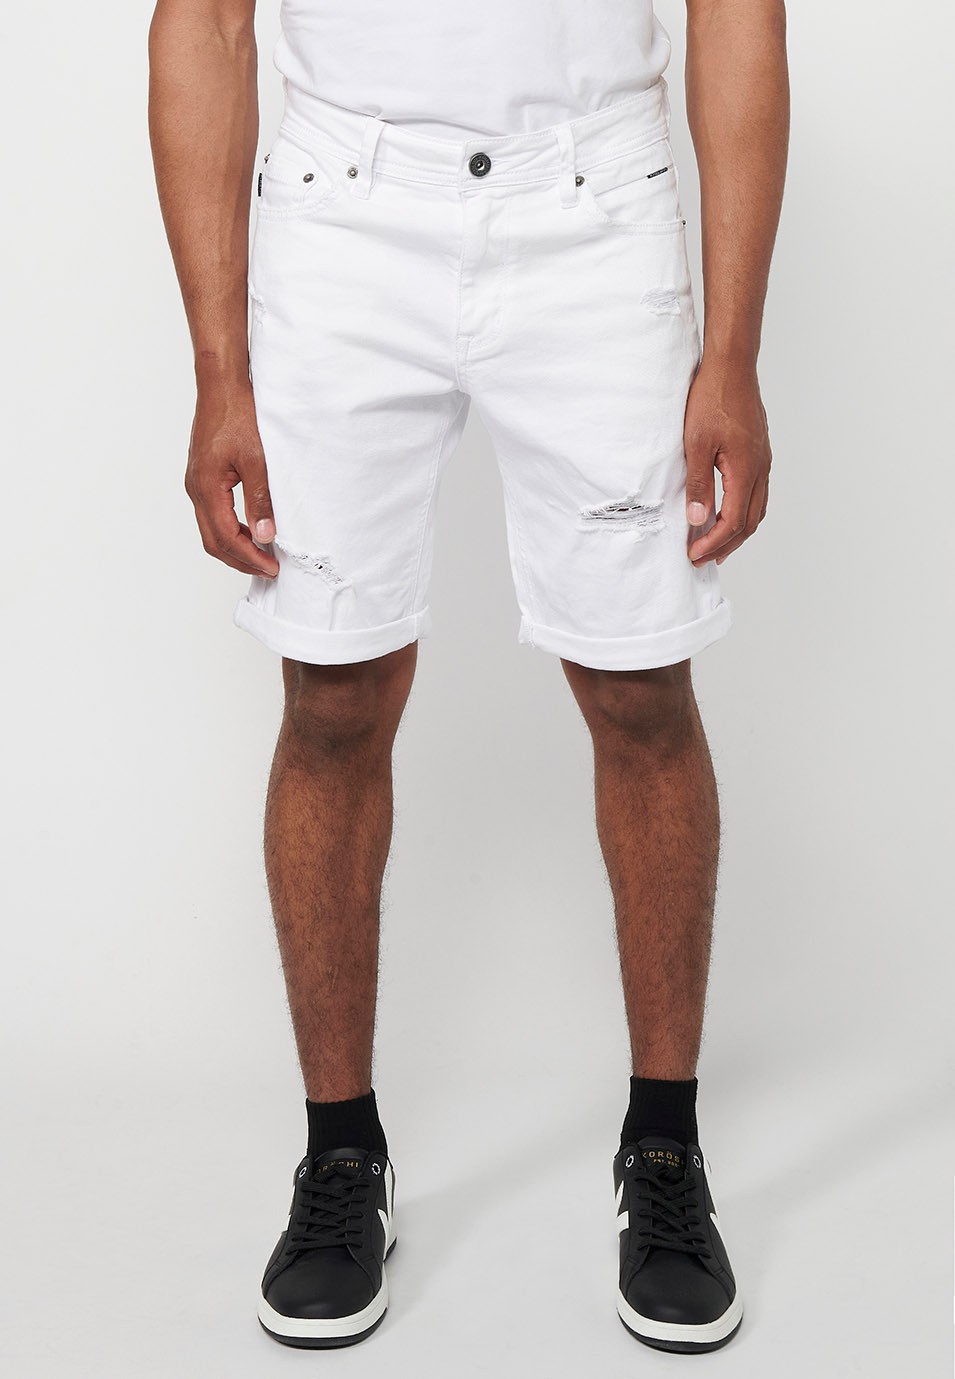 Denim Bermuda shorts with turn-up finish and front closure with zipper and button in White for Men 4